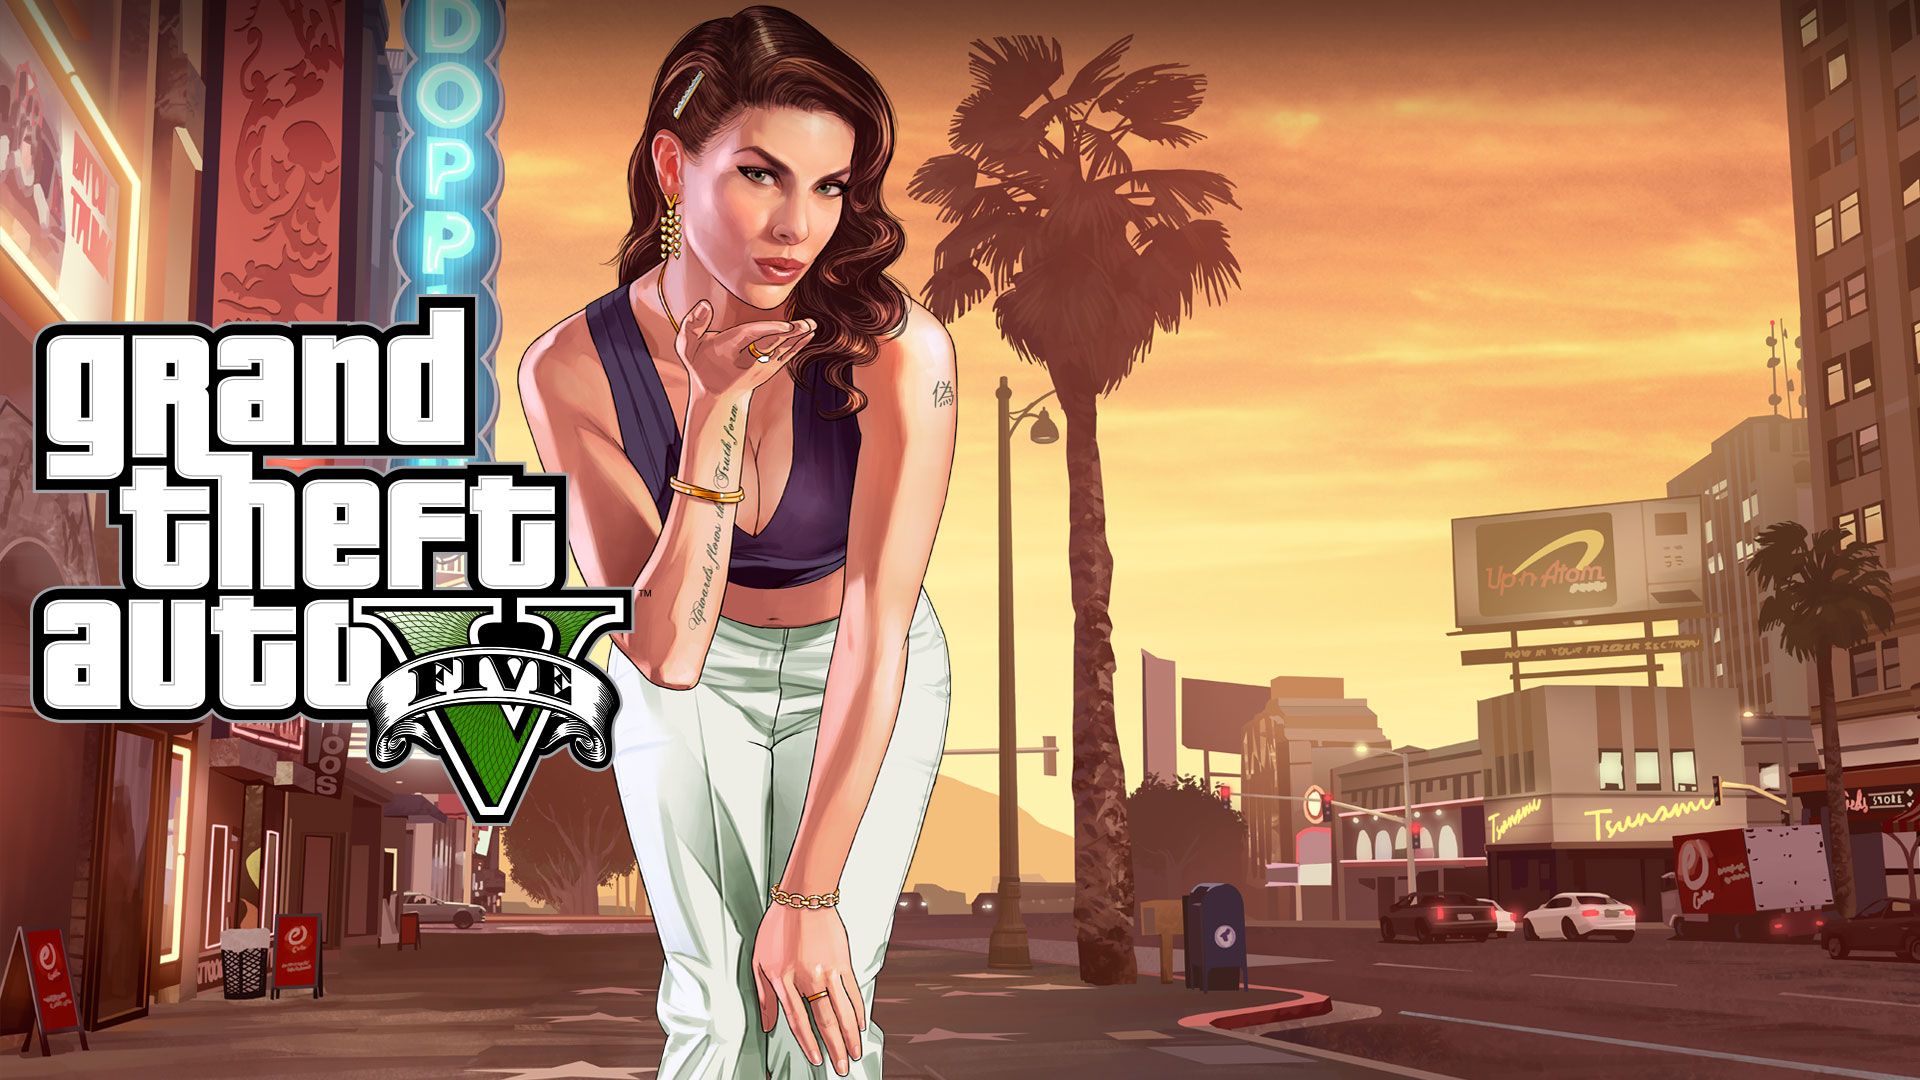 How to fix GTA Online files required to play error